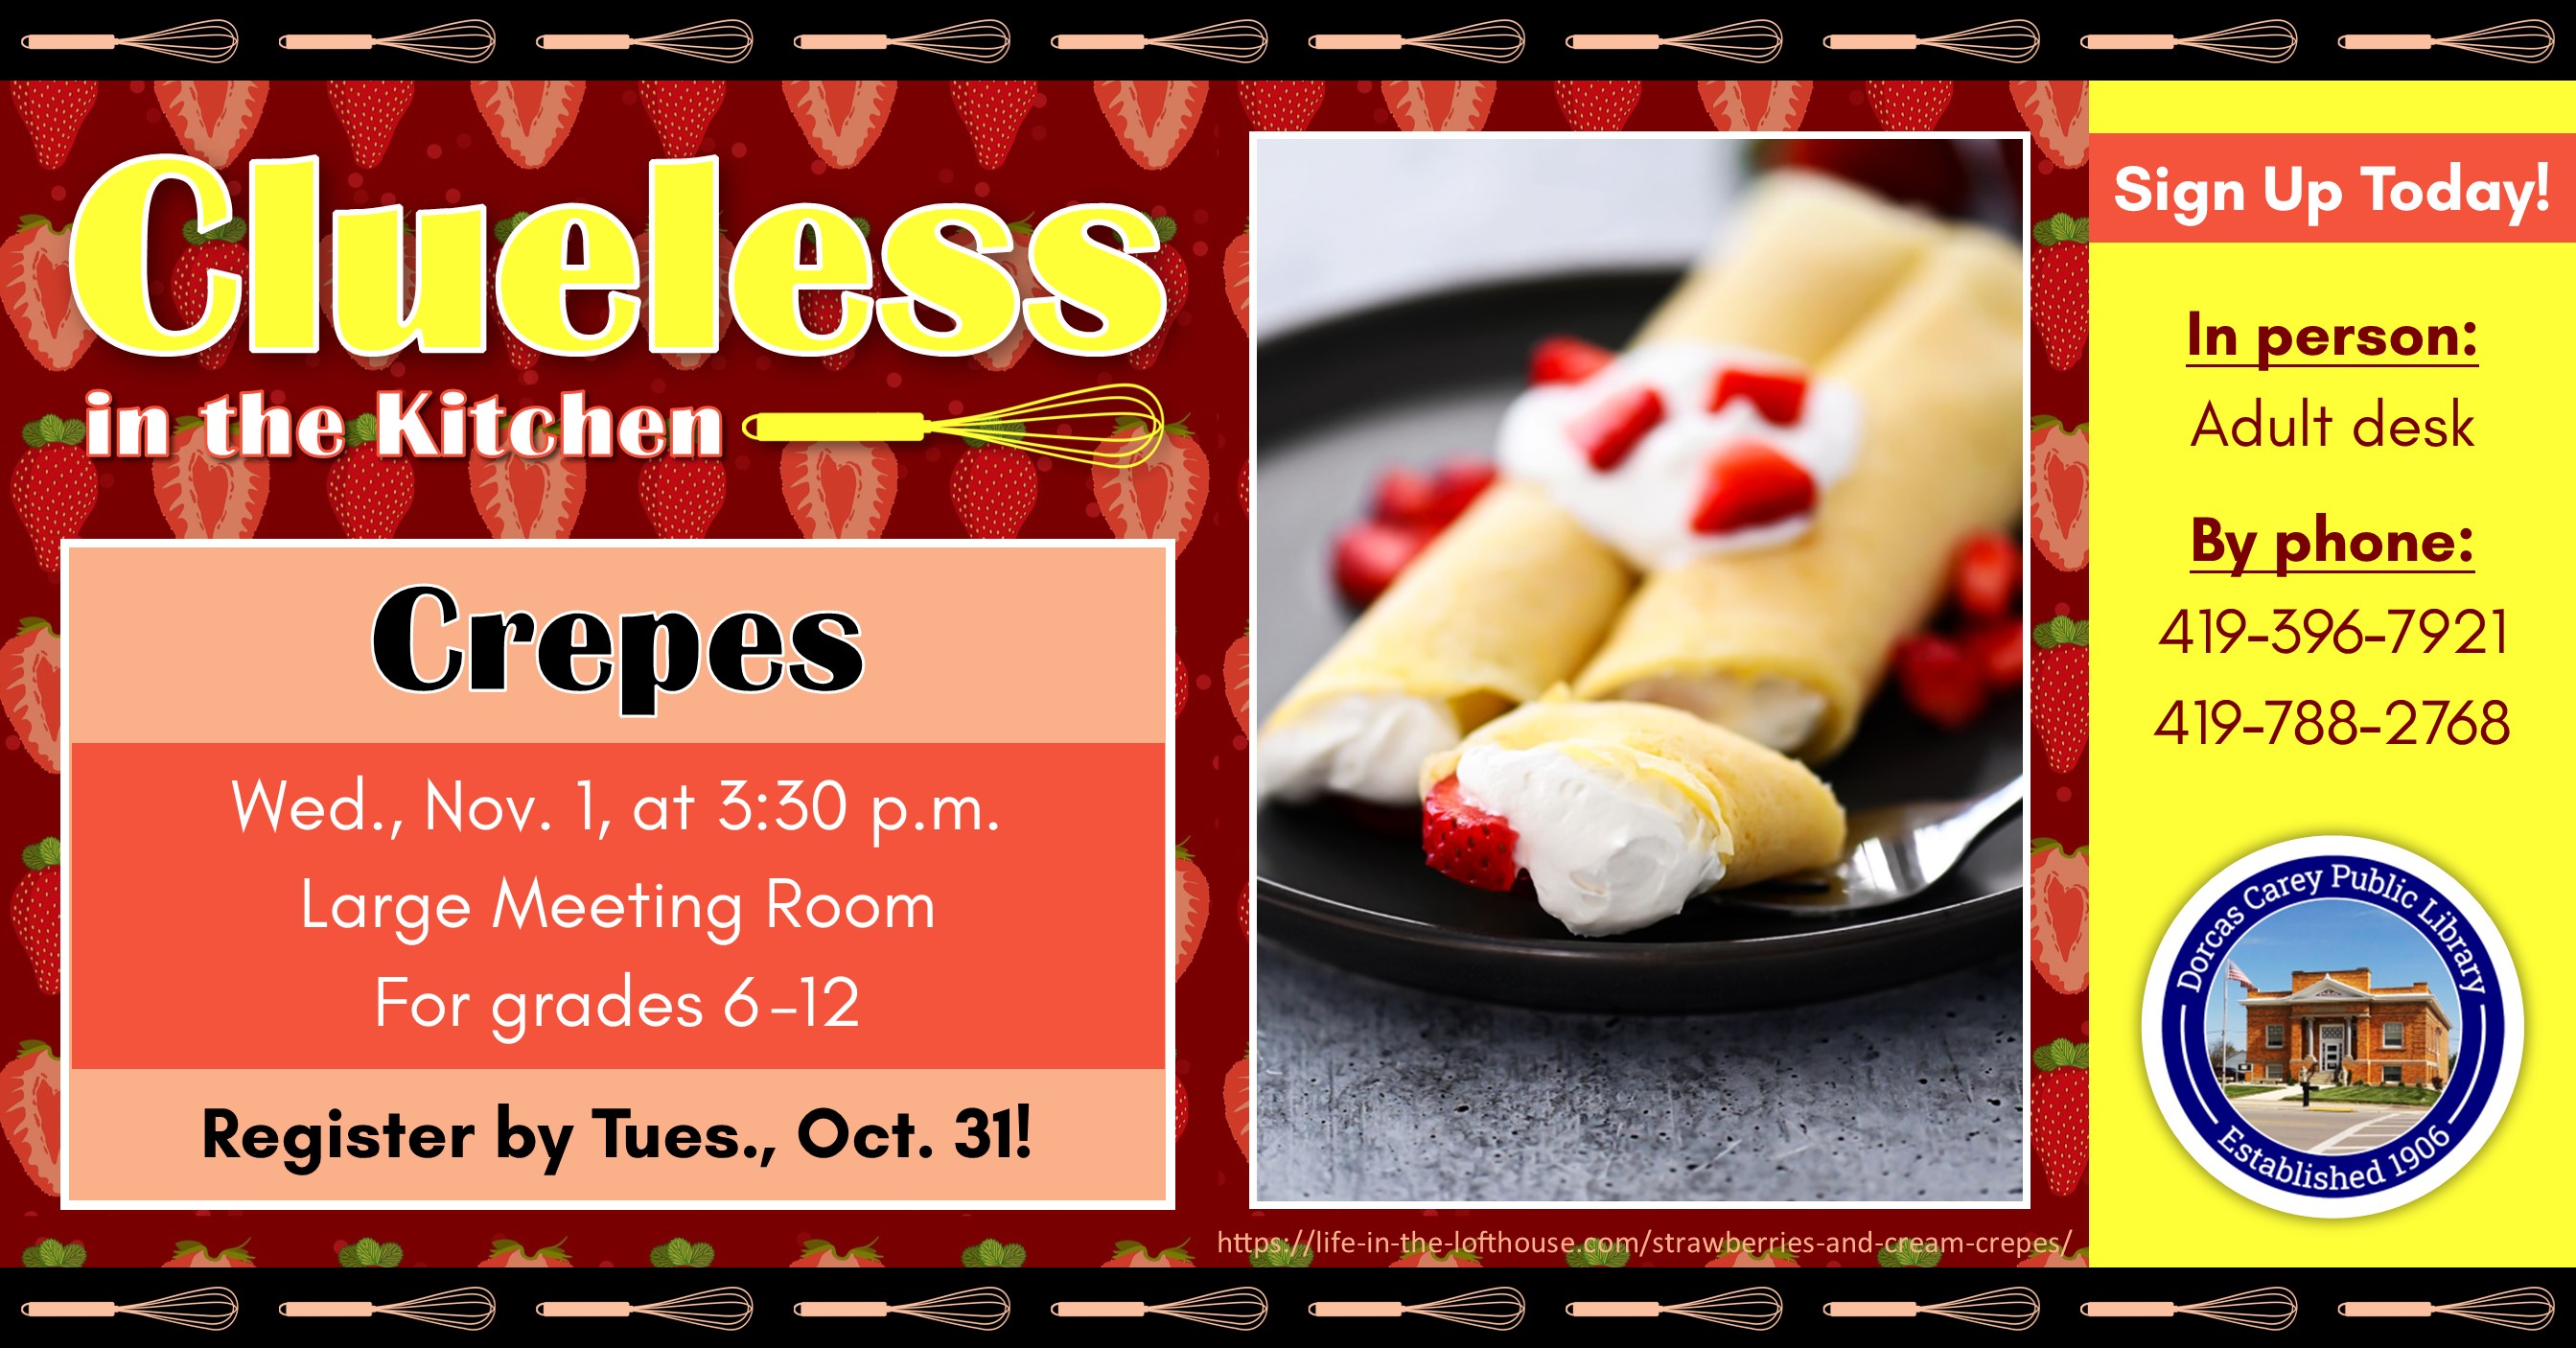 Come join in the cooking fun!  This program is for grades 6 through 12 and will take place the first Wednesday of the month September through May at 3:30 p.m.  This month’s project is:  Crepes.  Please sign up at the adult circulation desk or by phone at 419-396-7921 or 419-788-2768.